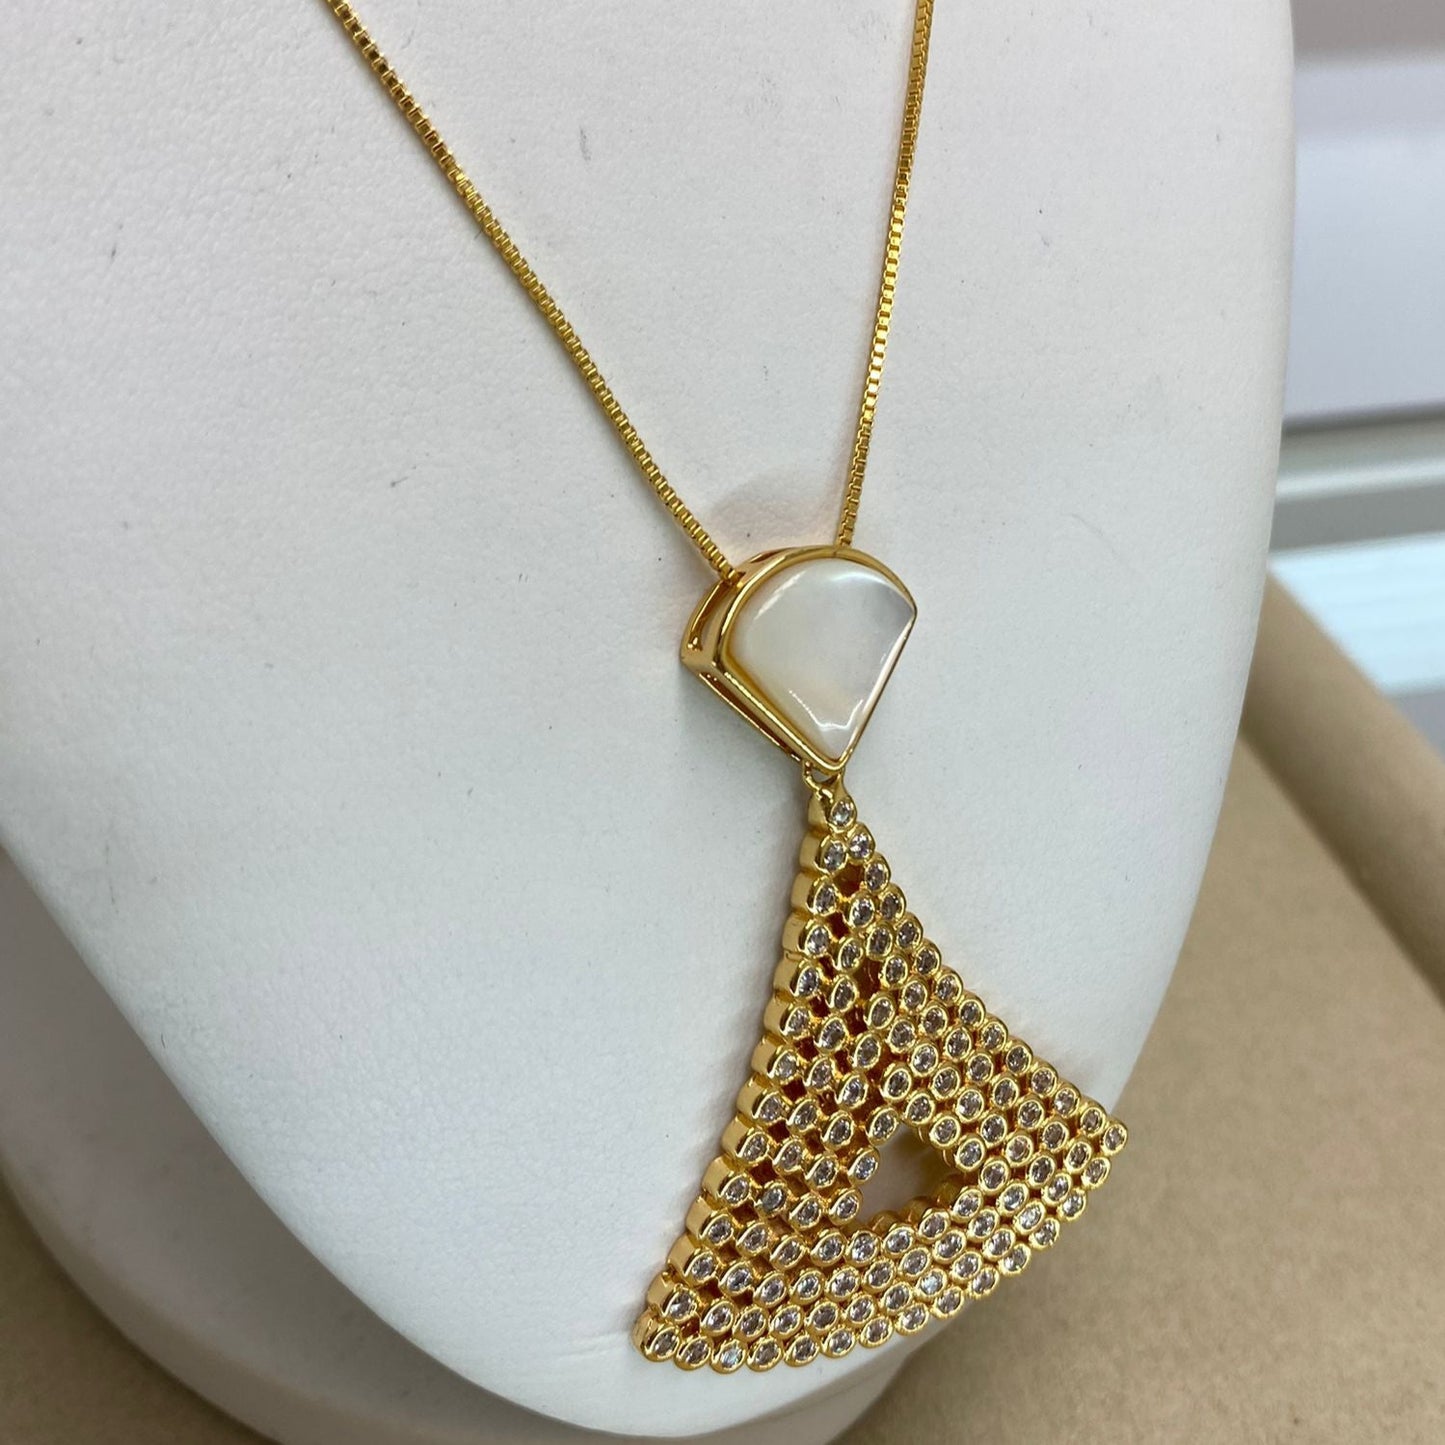 Golden Triangle Pendant Necklace with Zirconia and White Stone